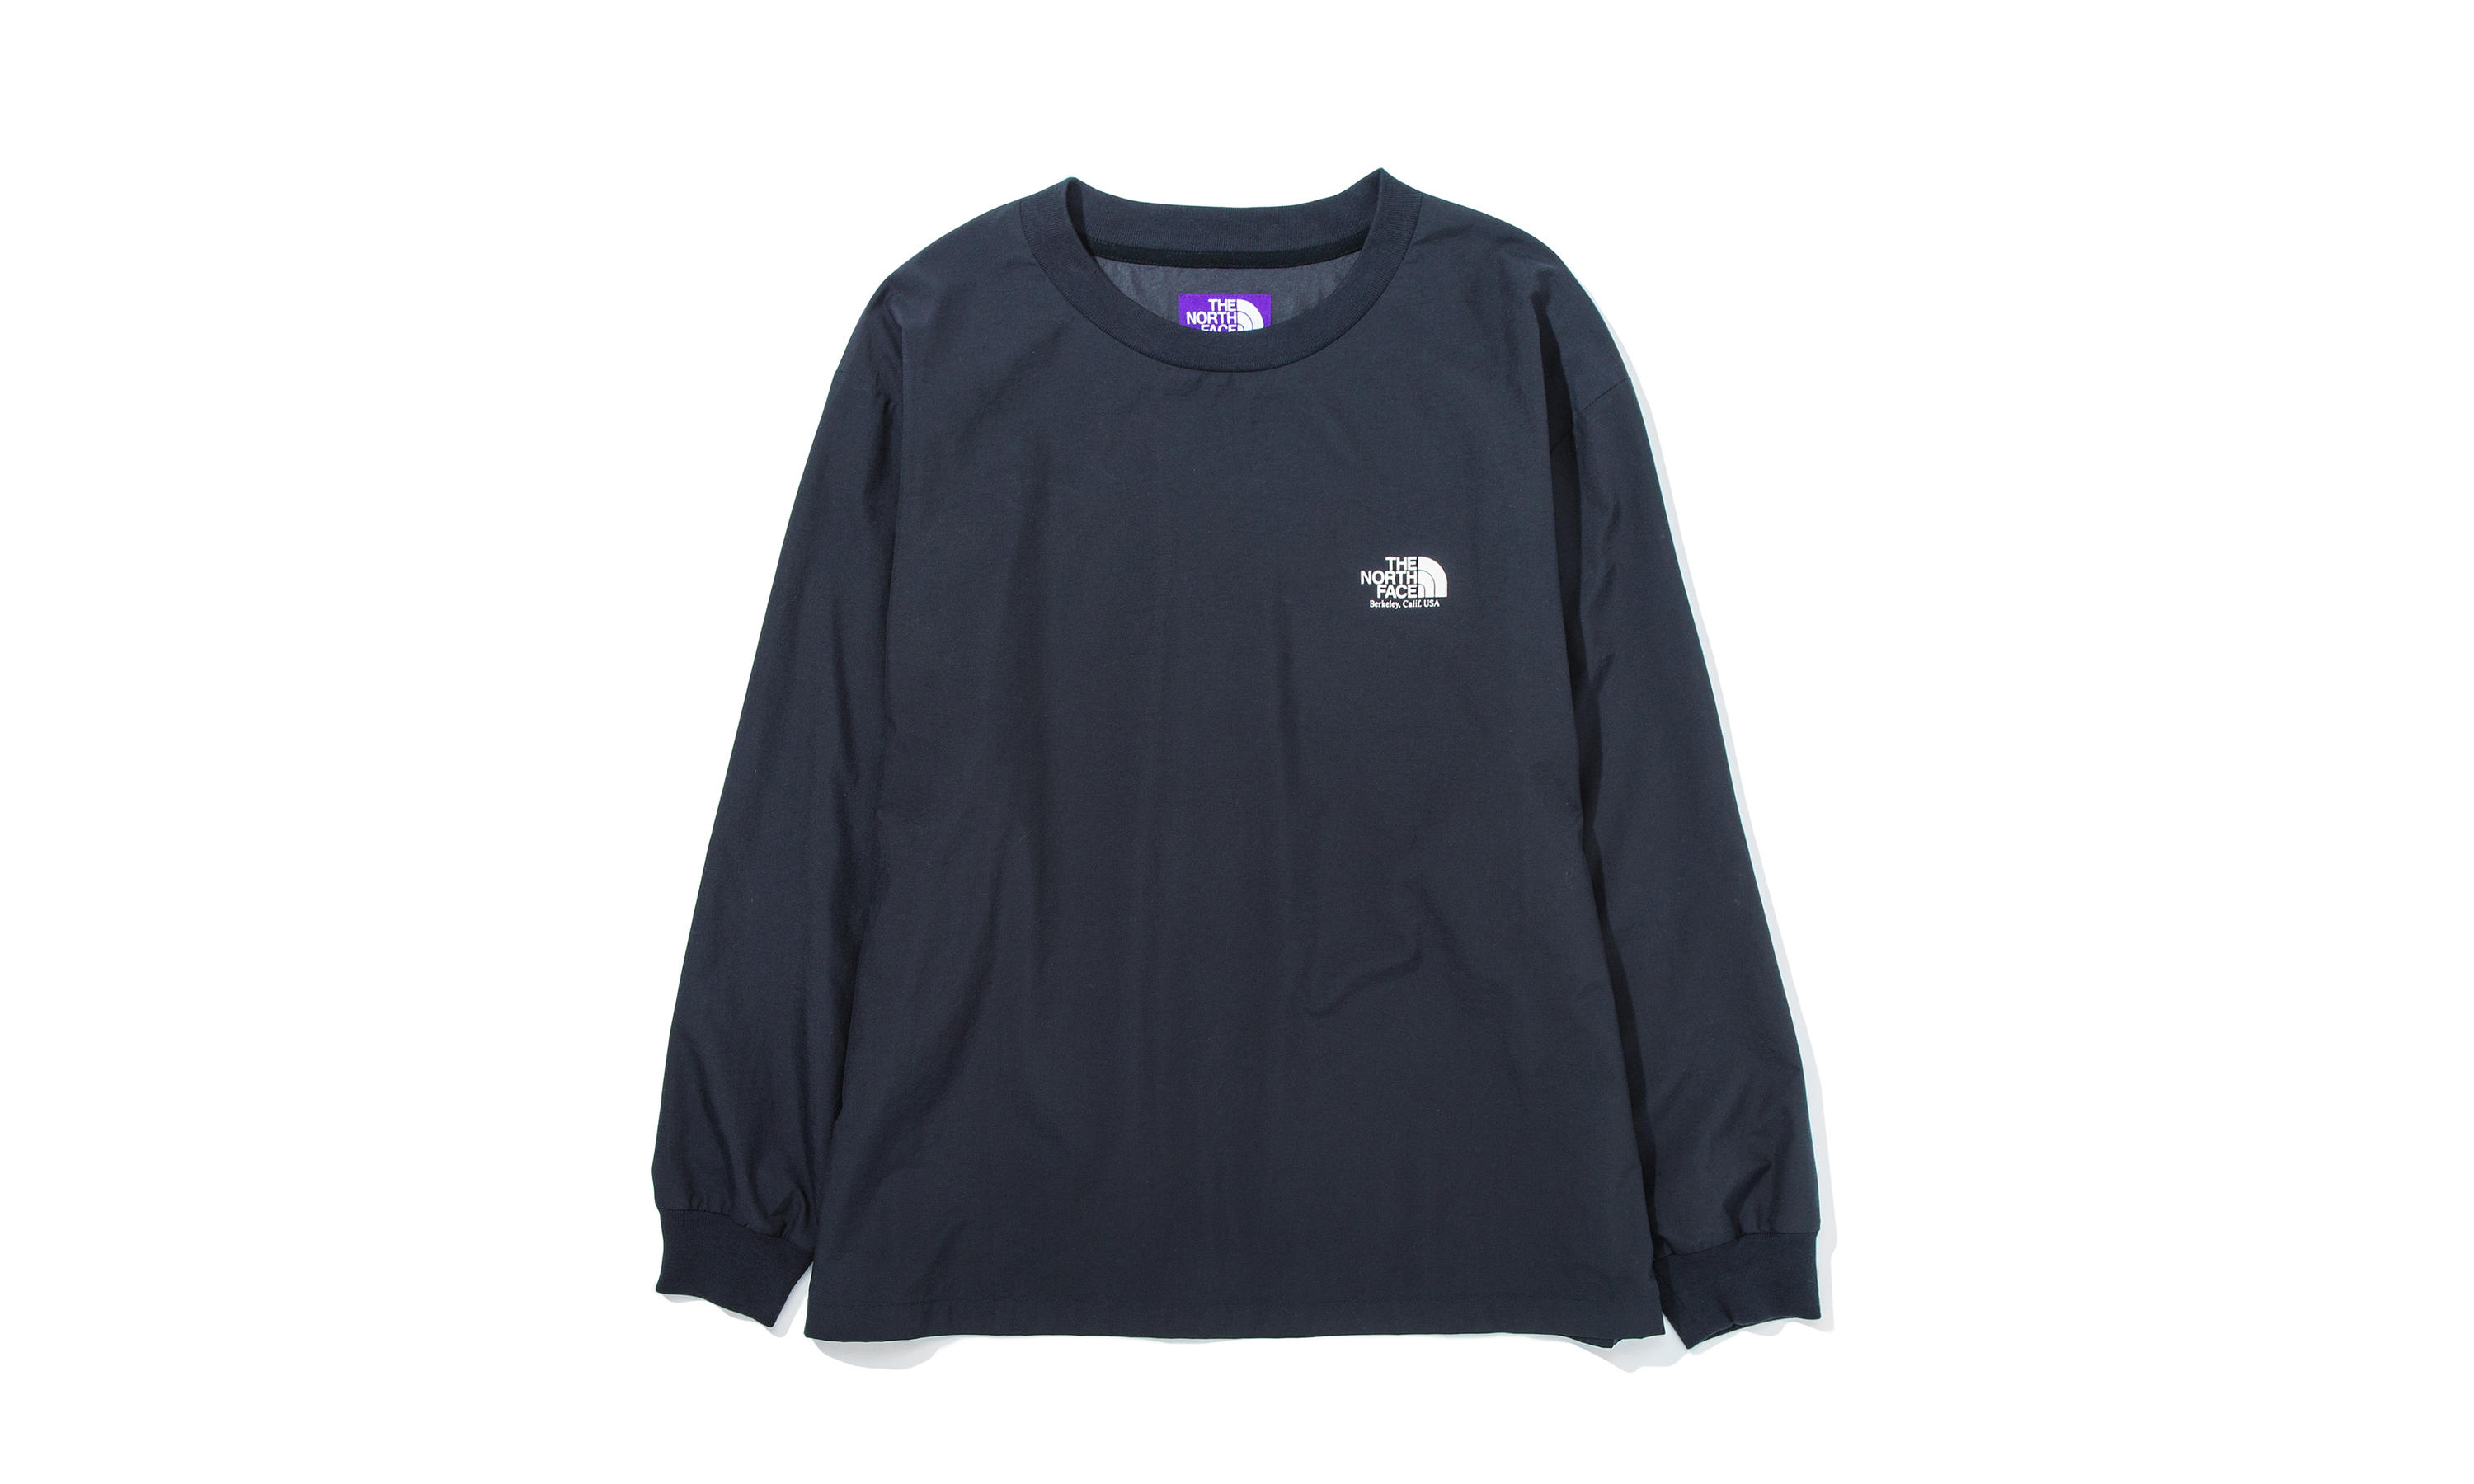 THE NORTH FACE PURPLE LABEL x BEAUTY&YOUTH 全新联名系列释出